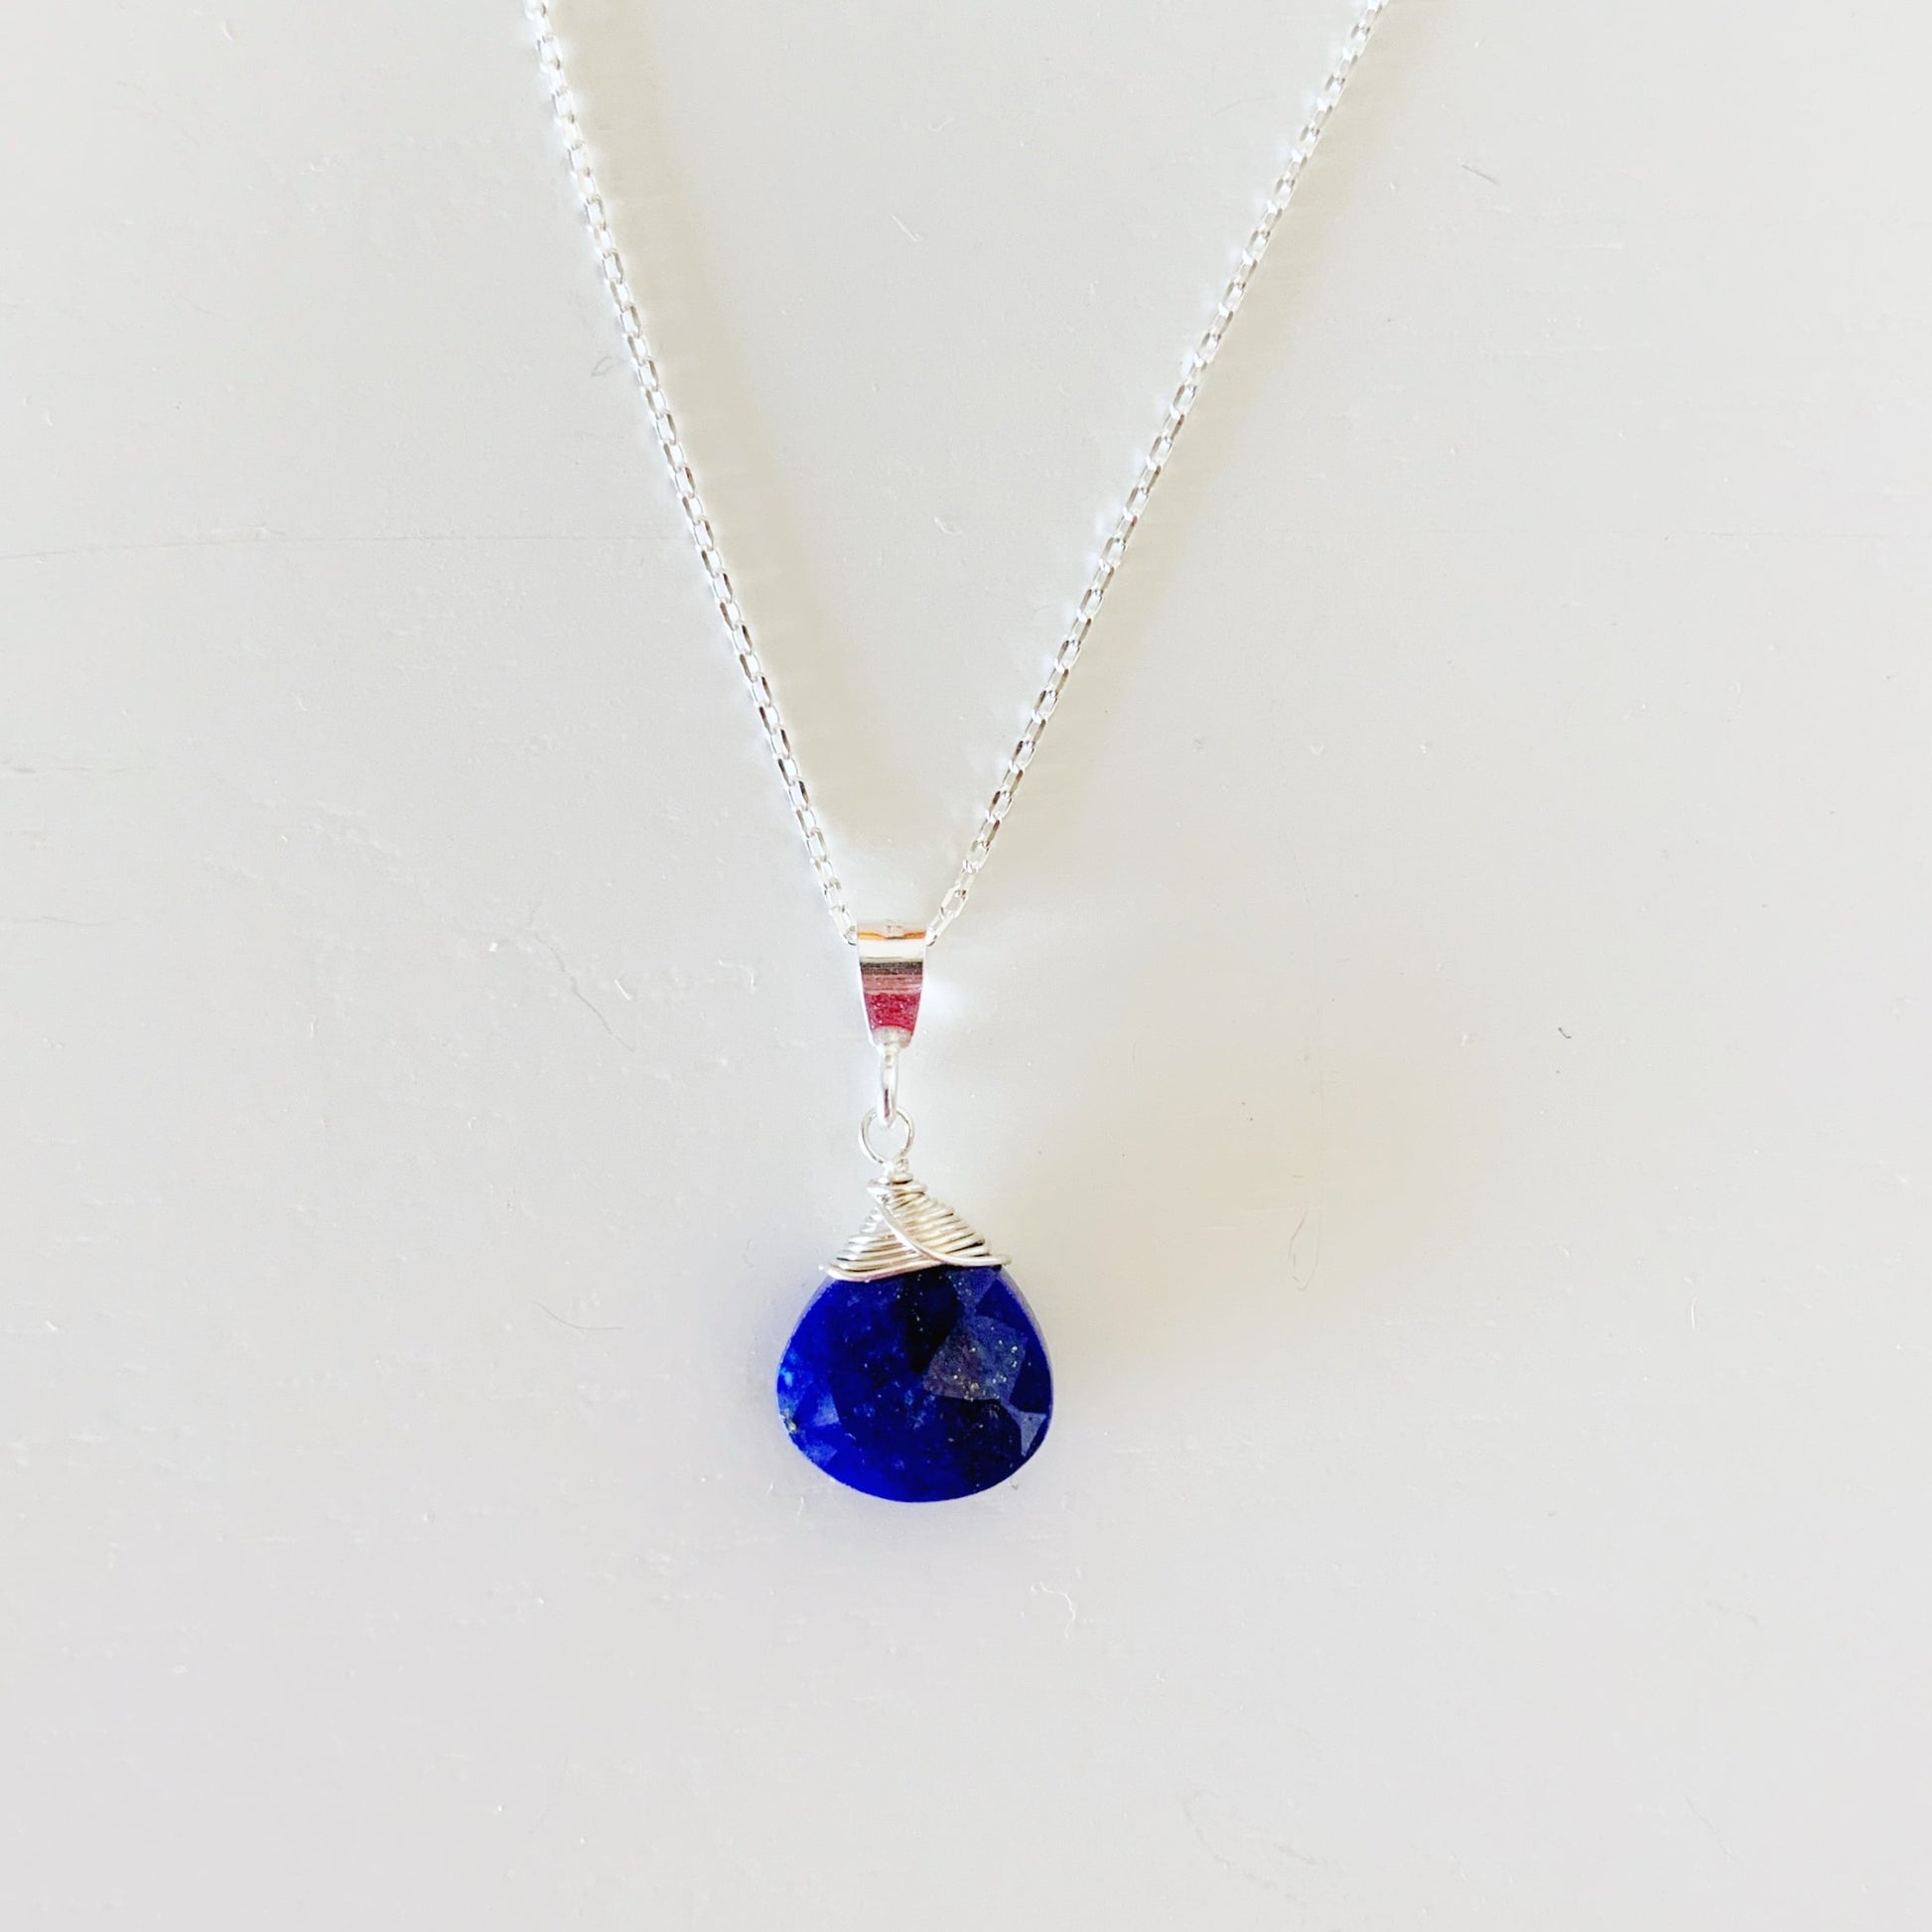 The neptune pendant necklace by mermaids and madeleines is created with a blue lapis faceted briolette, wrapped in sterling silver wire on a sterling silver chain. this necklace is photographed on a white background